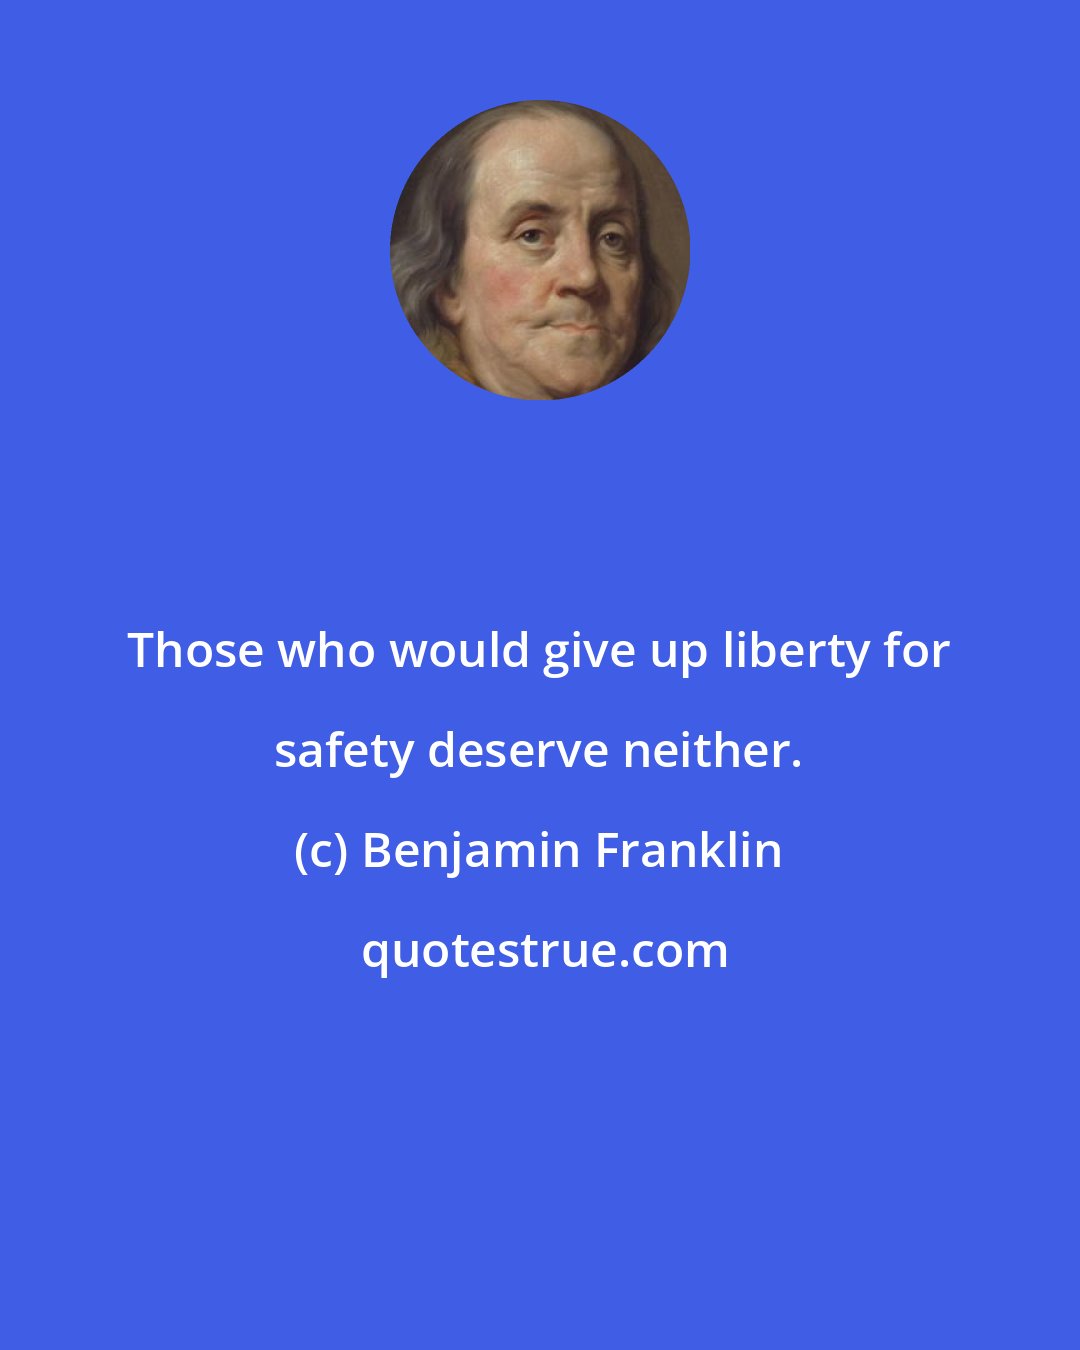 Benjamin Franklin: Those who would give up liberty for safety deserve neither.